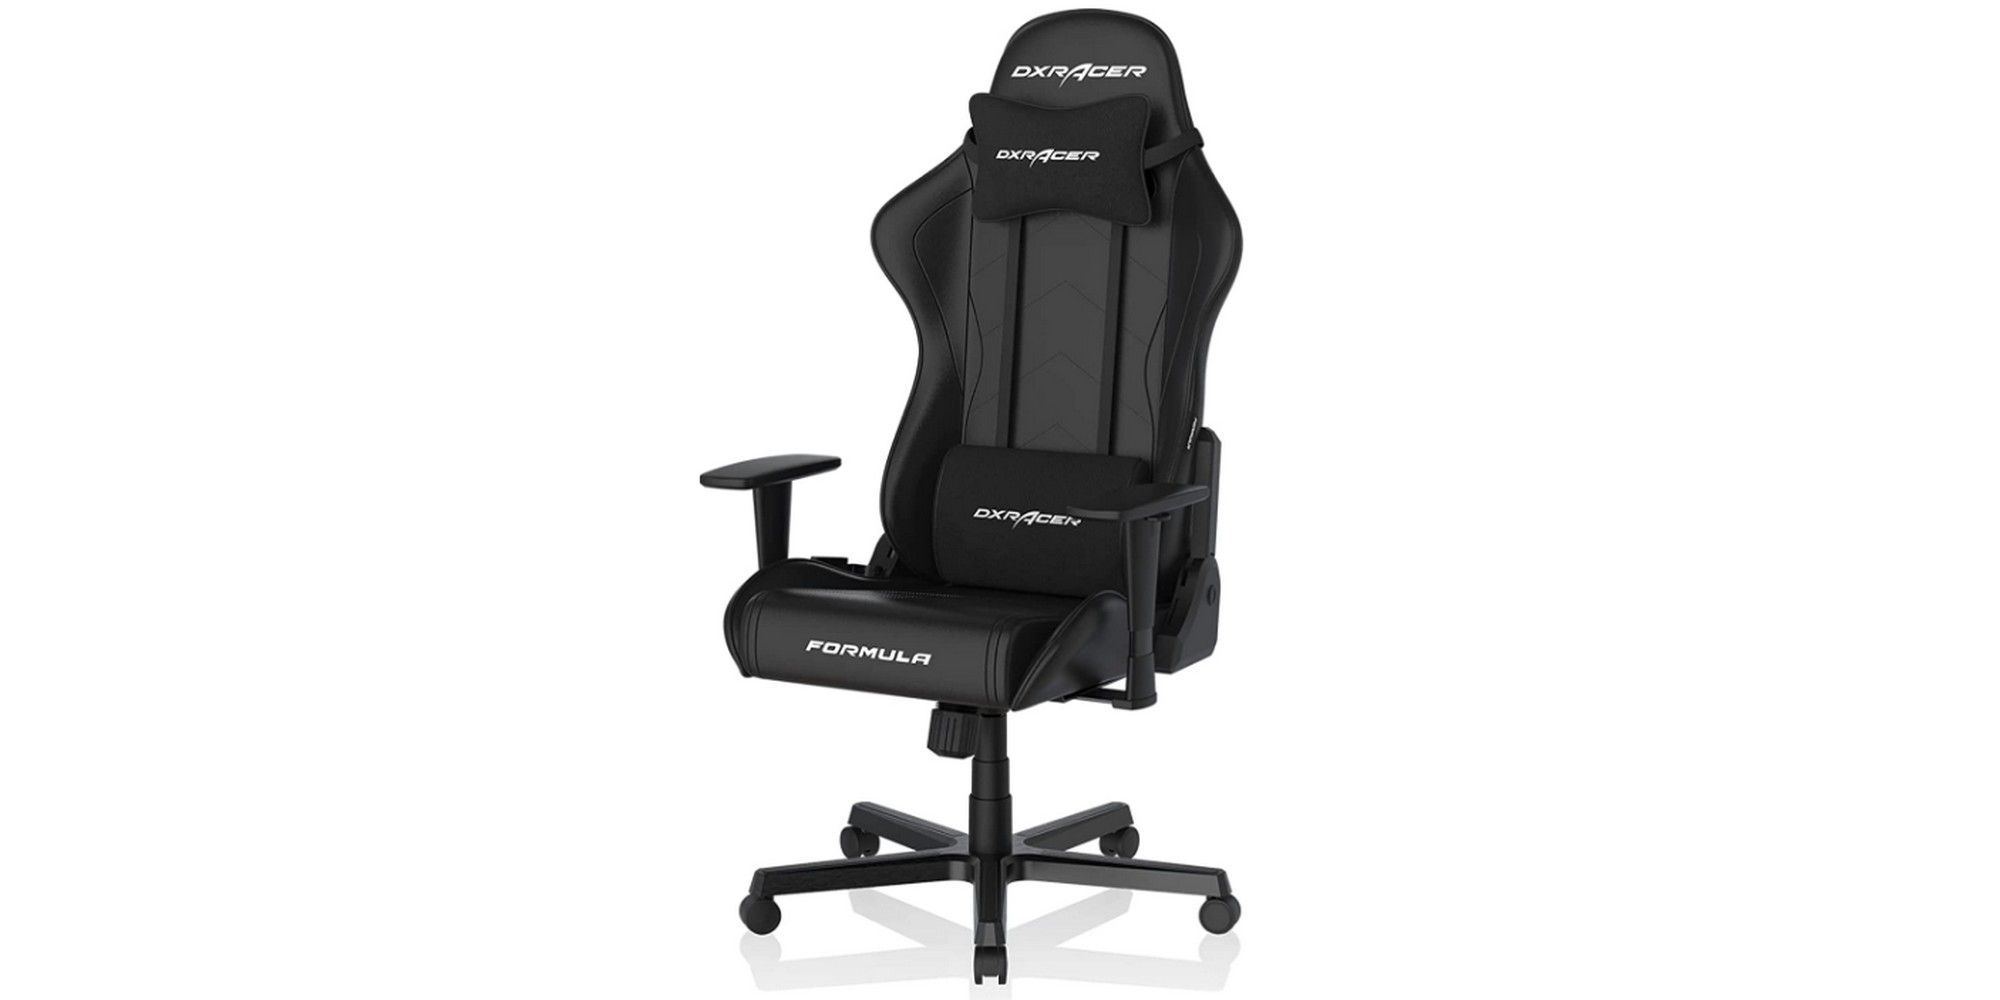 dxracer gaming chair black holiday buyer's guide